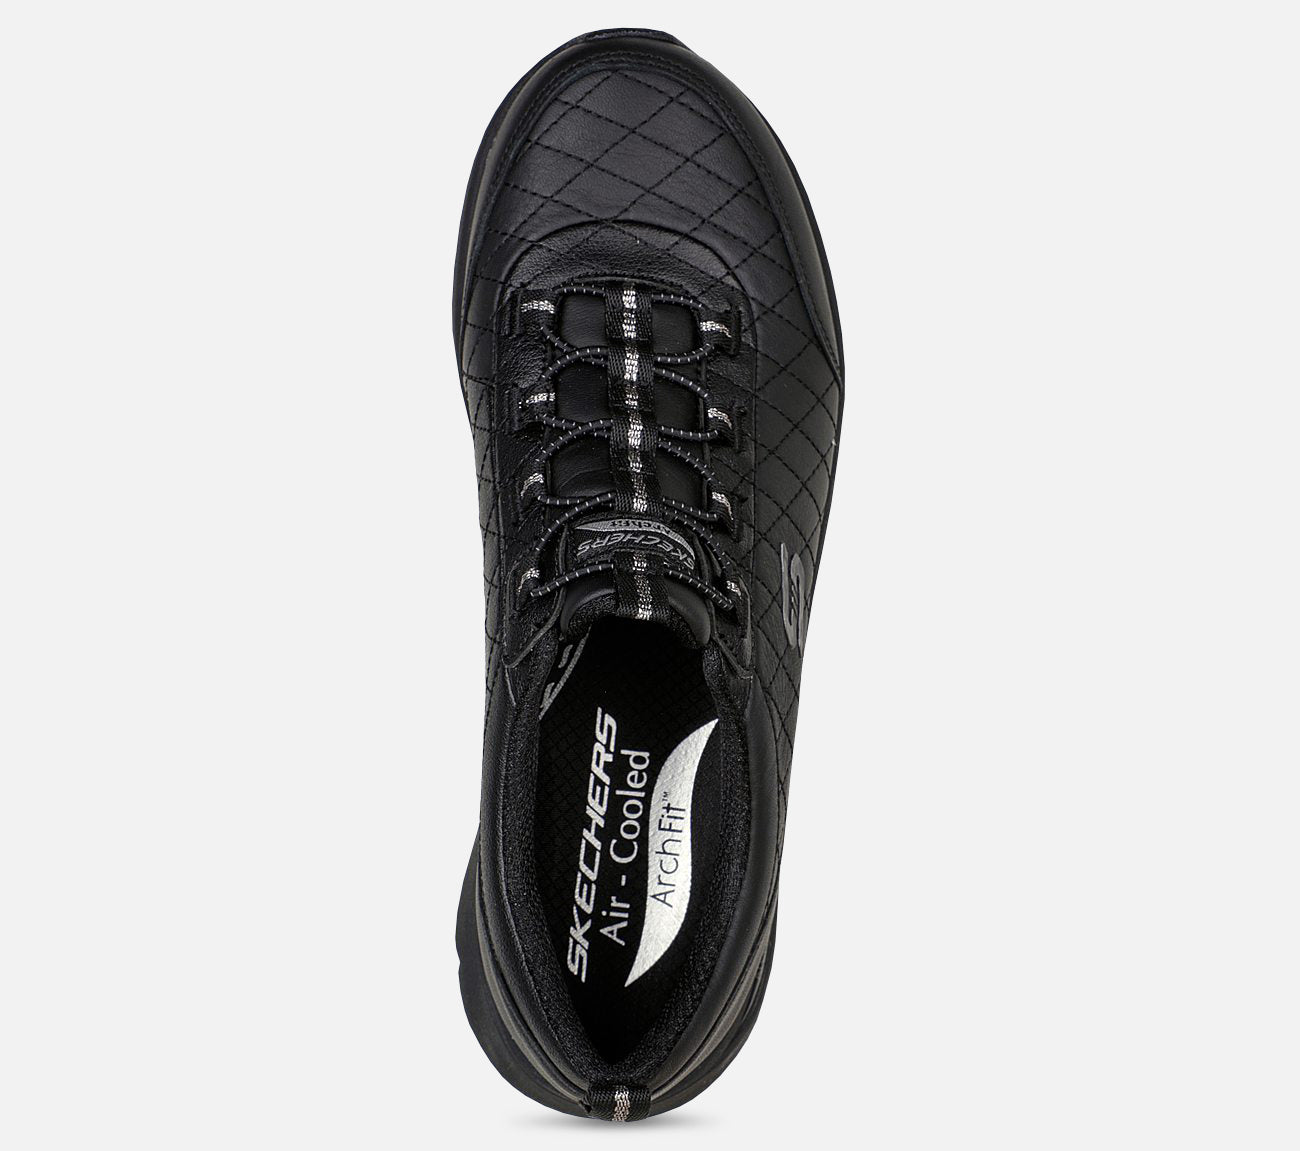 Skech-Air Arch Fit - Royal Luxe Shoe Skechers